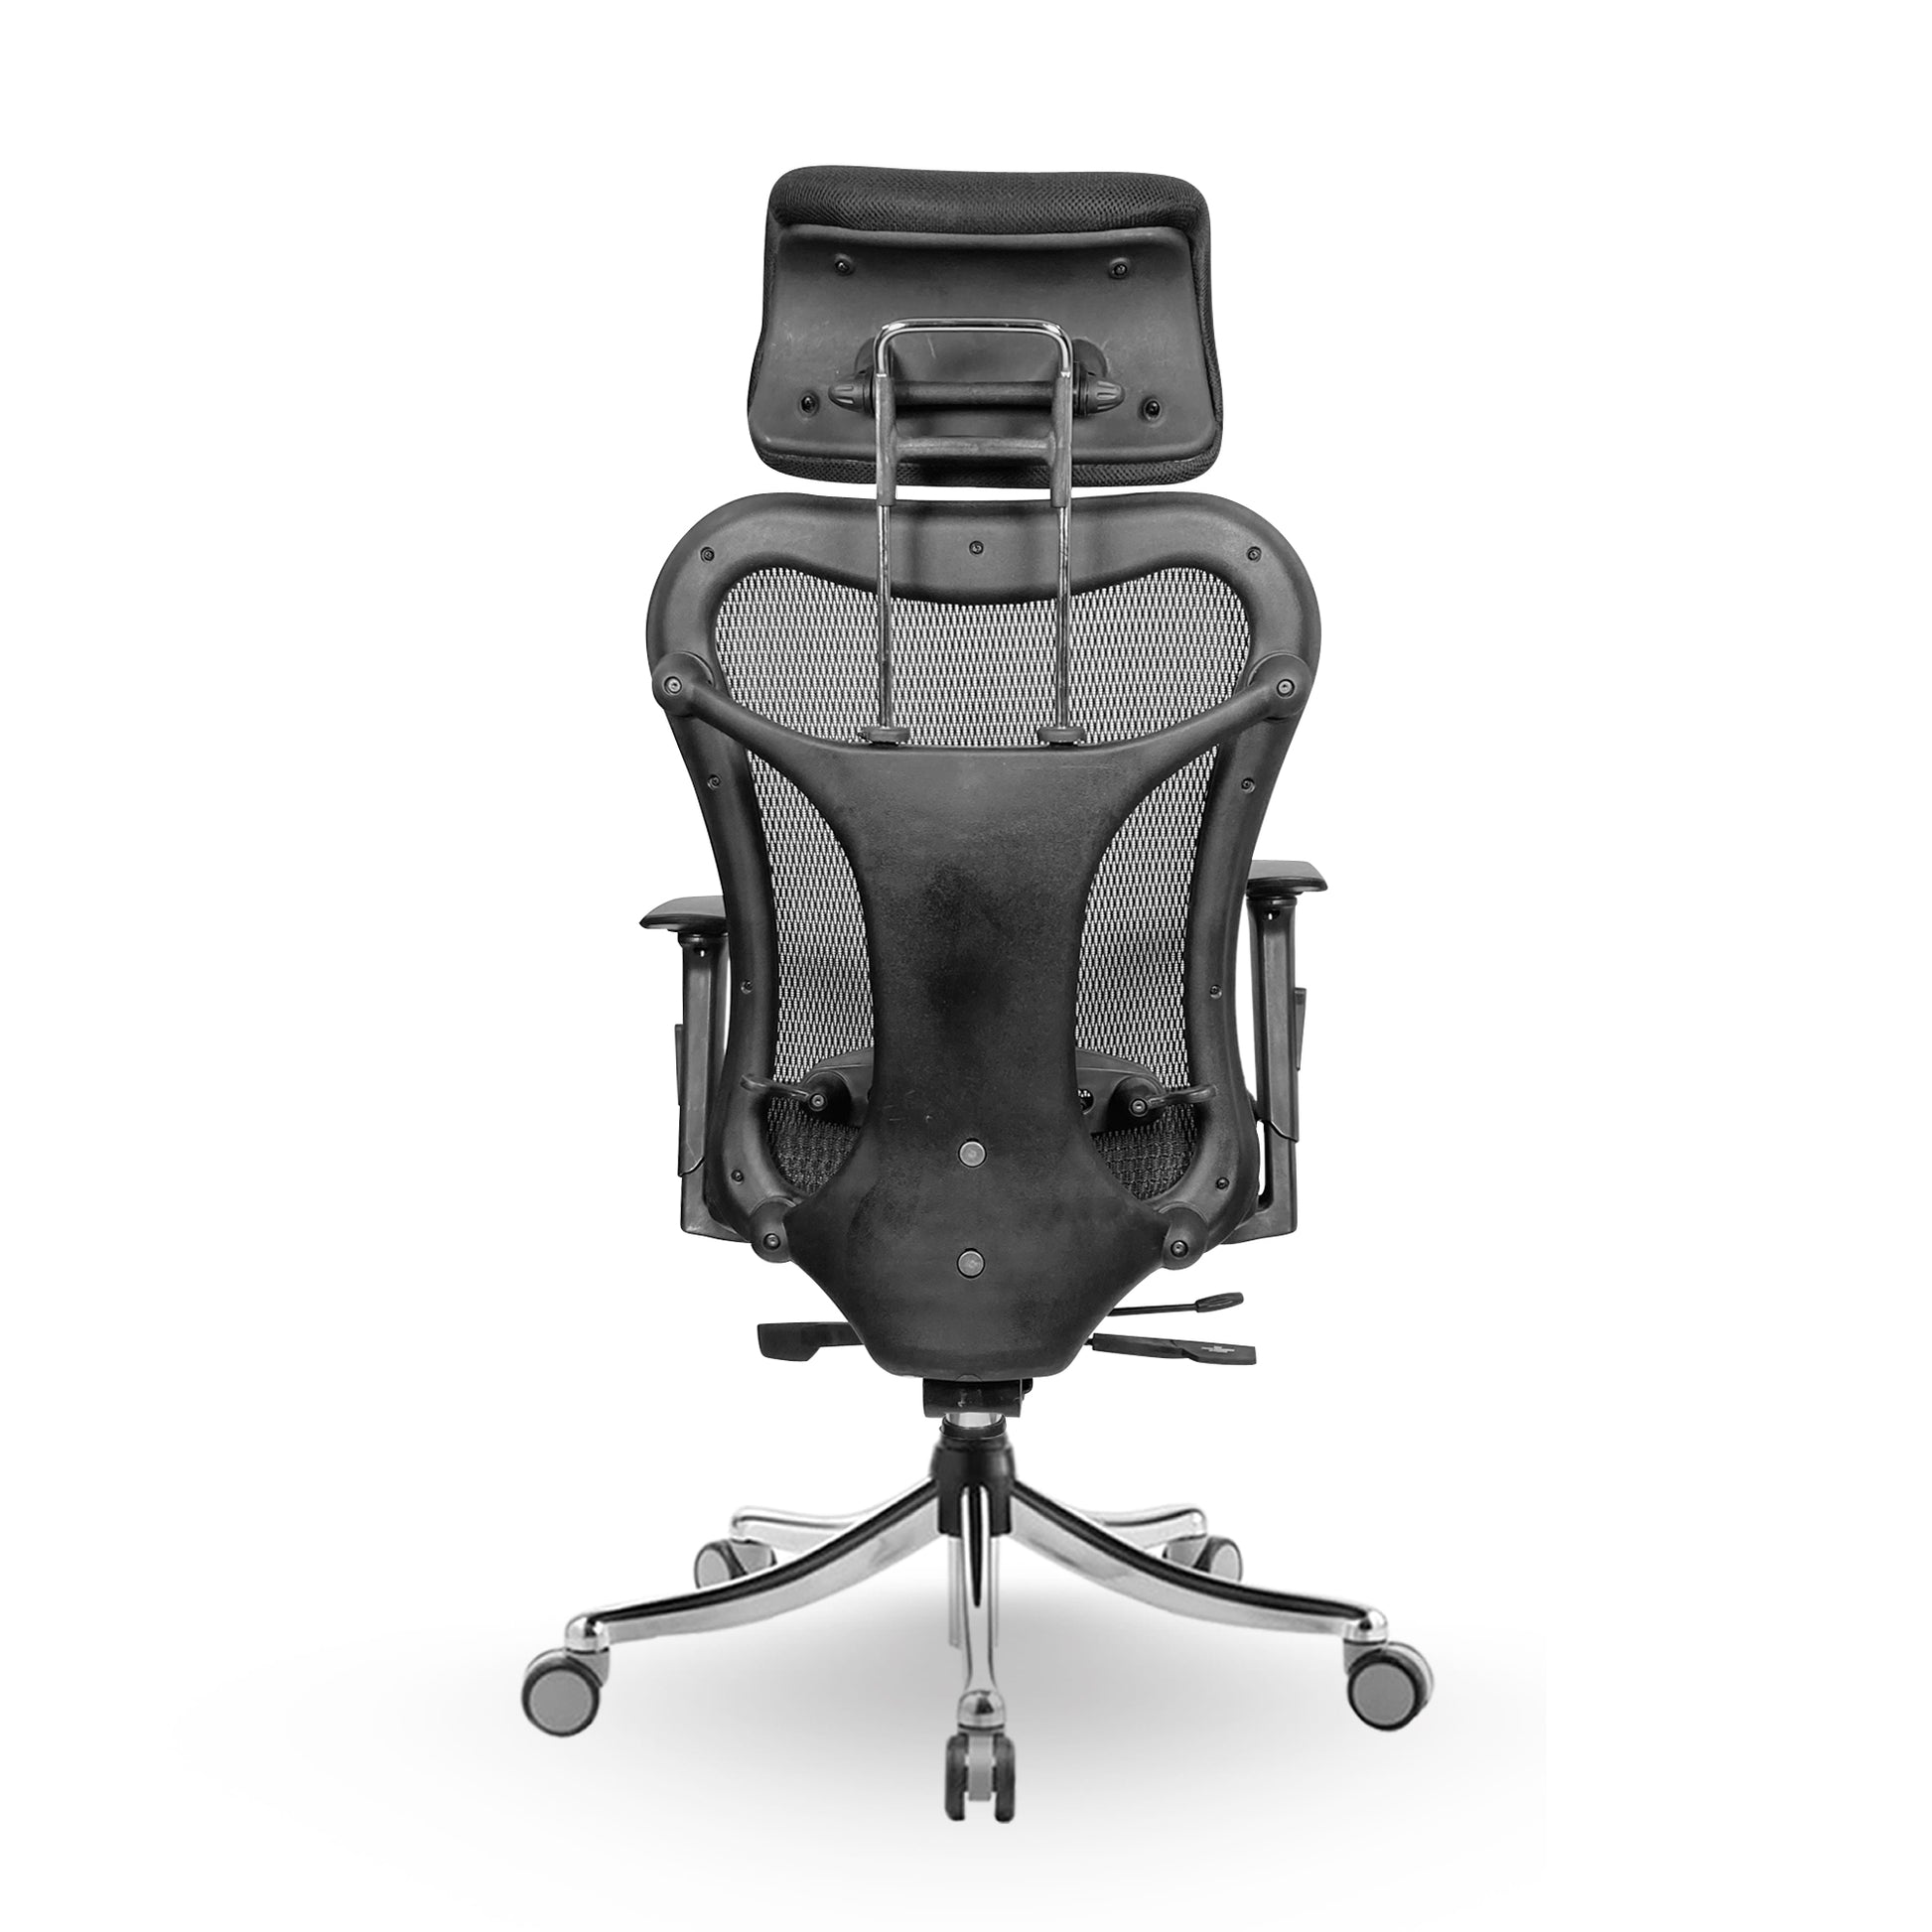 Optimus Elite Mesh Seat High Back Chair Director Chairs - makemychairs